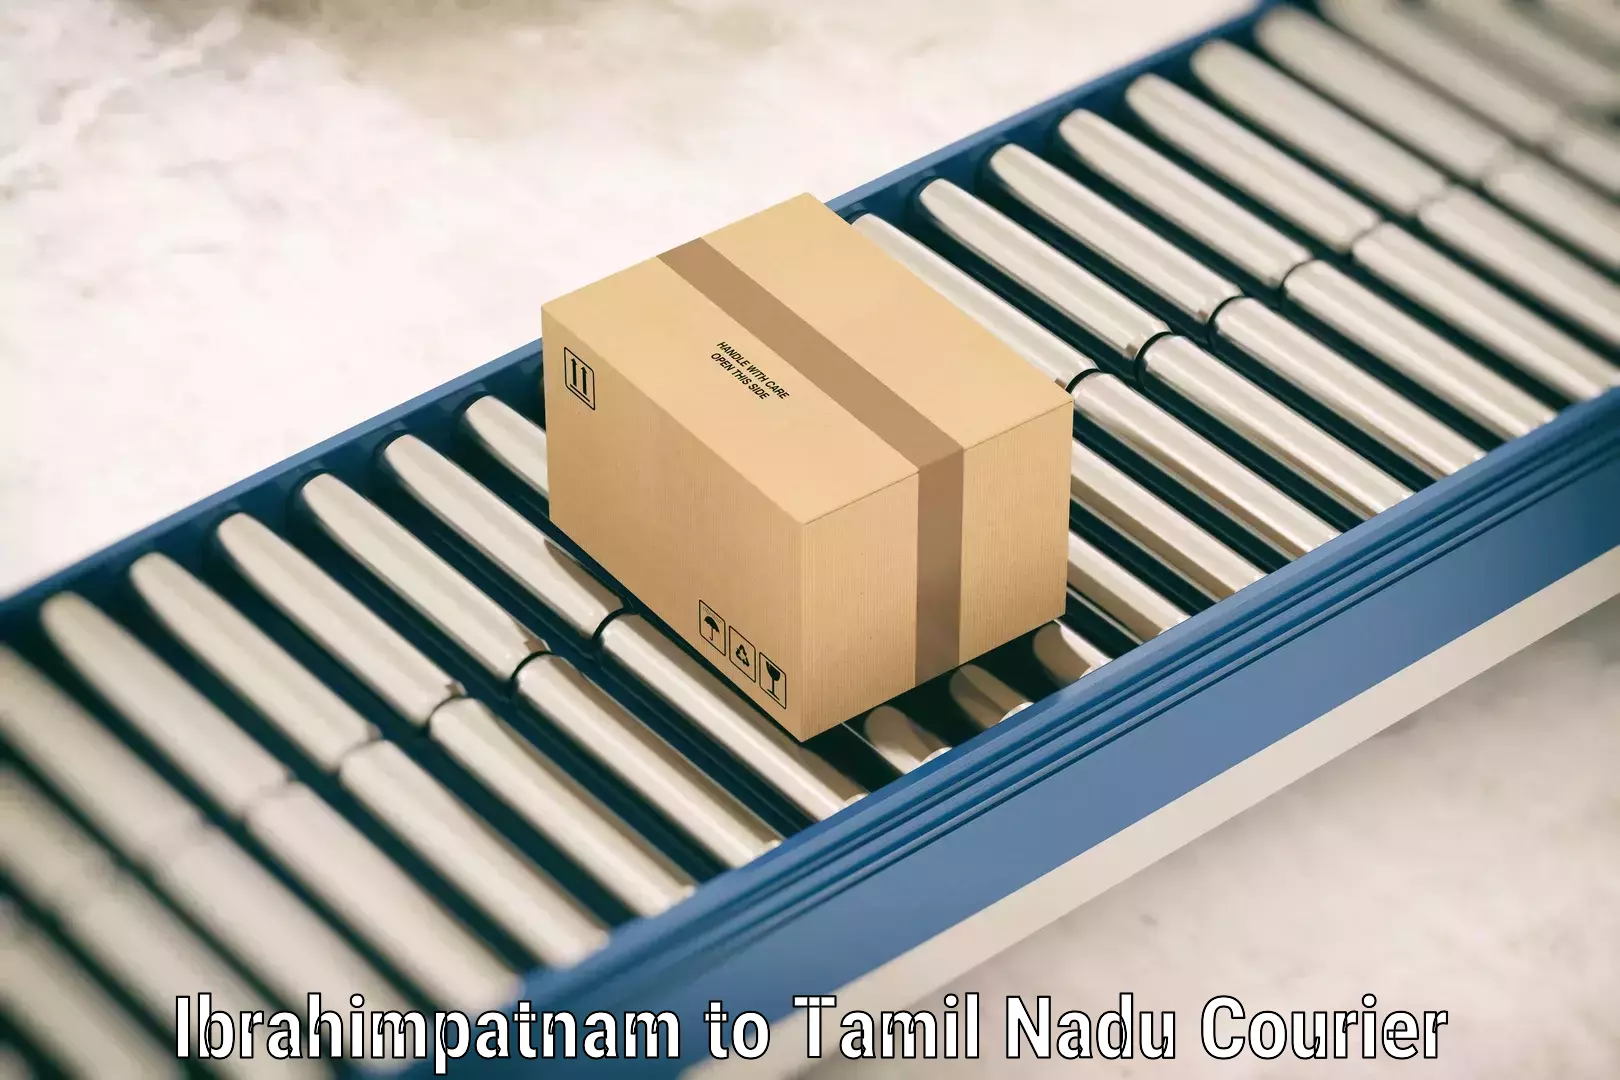 Express luggage delivery in Ibrahimpatnam to Kunnathur